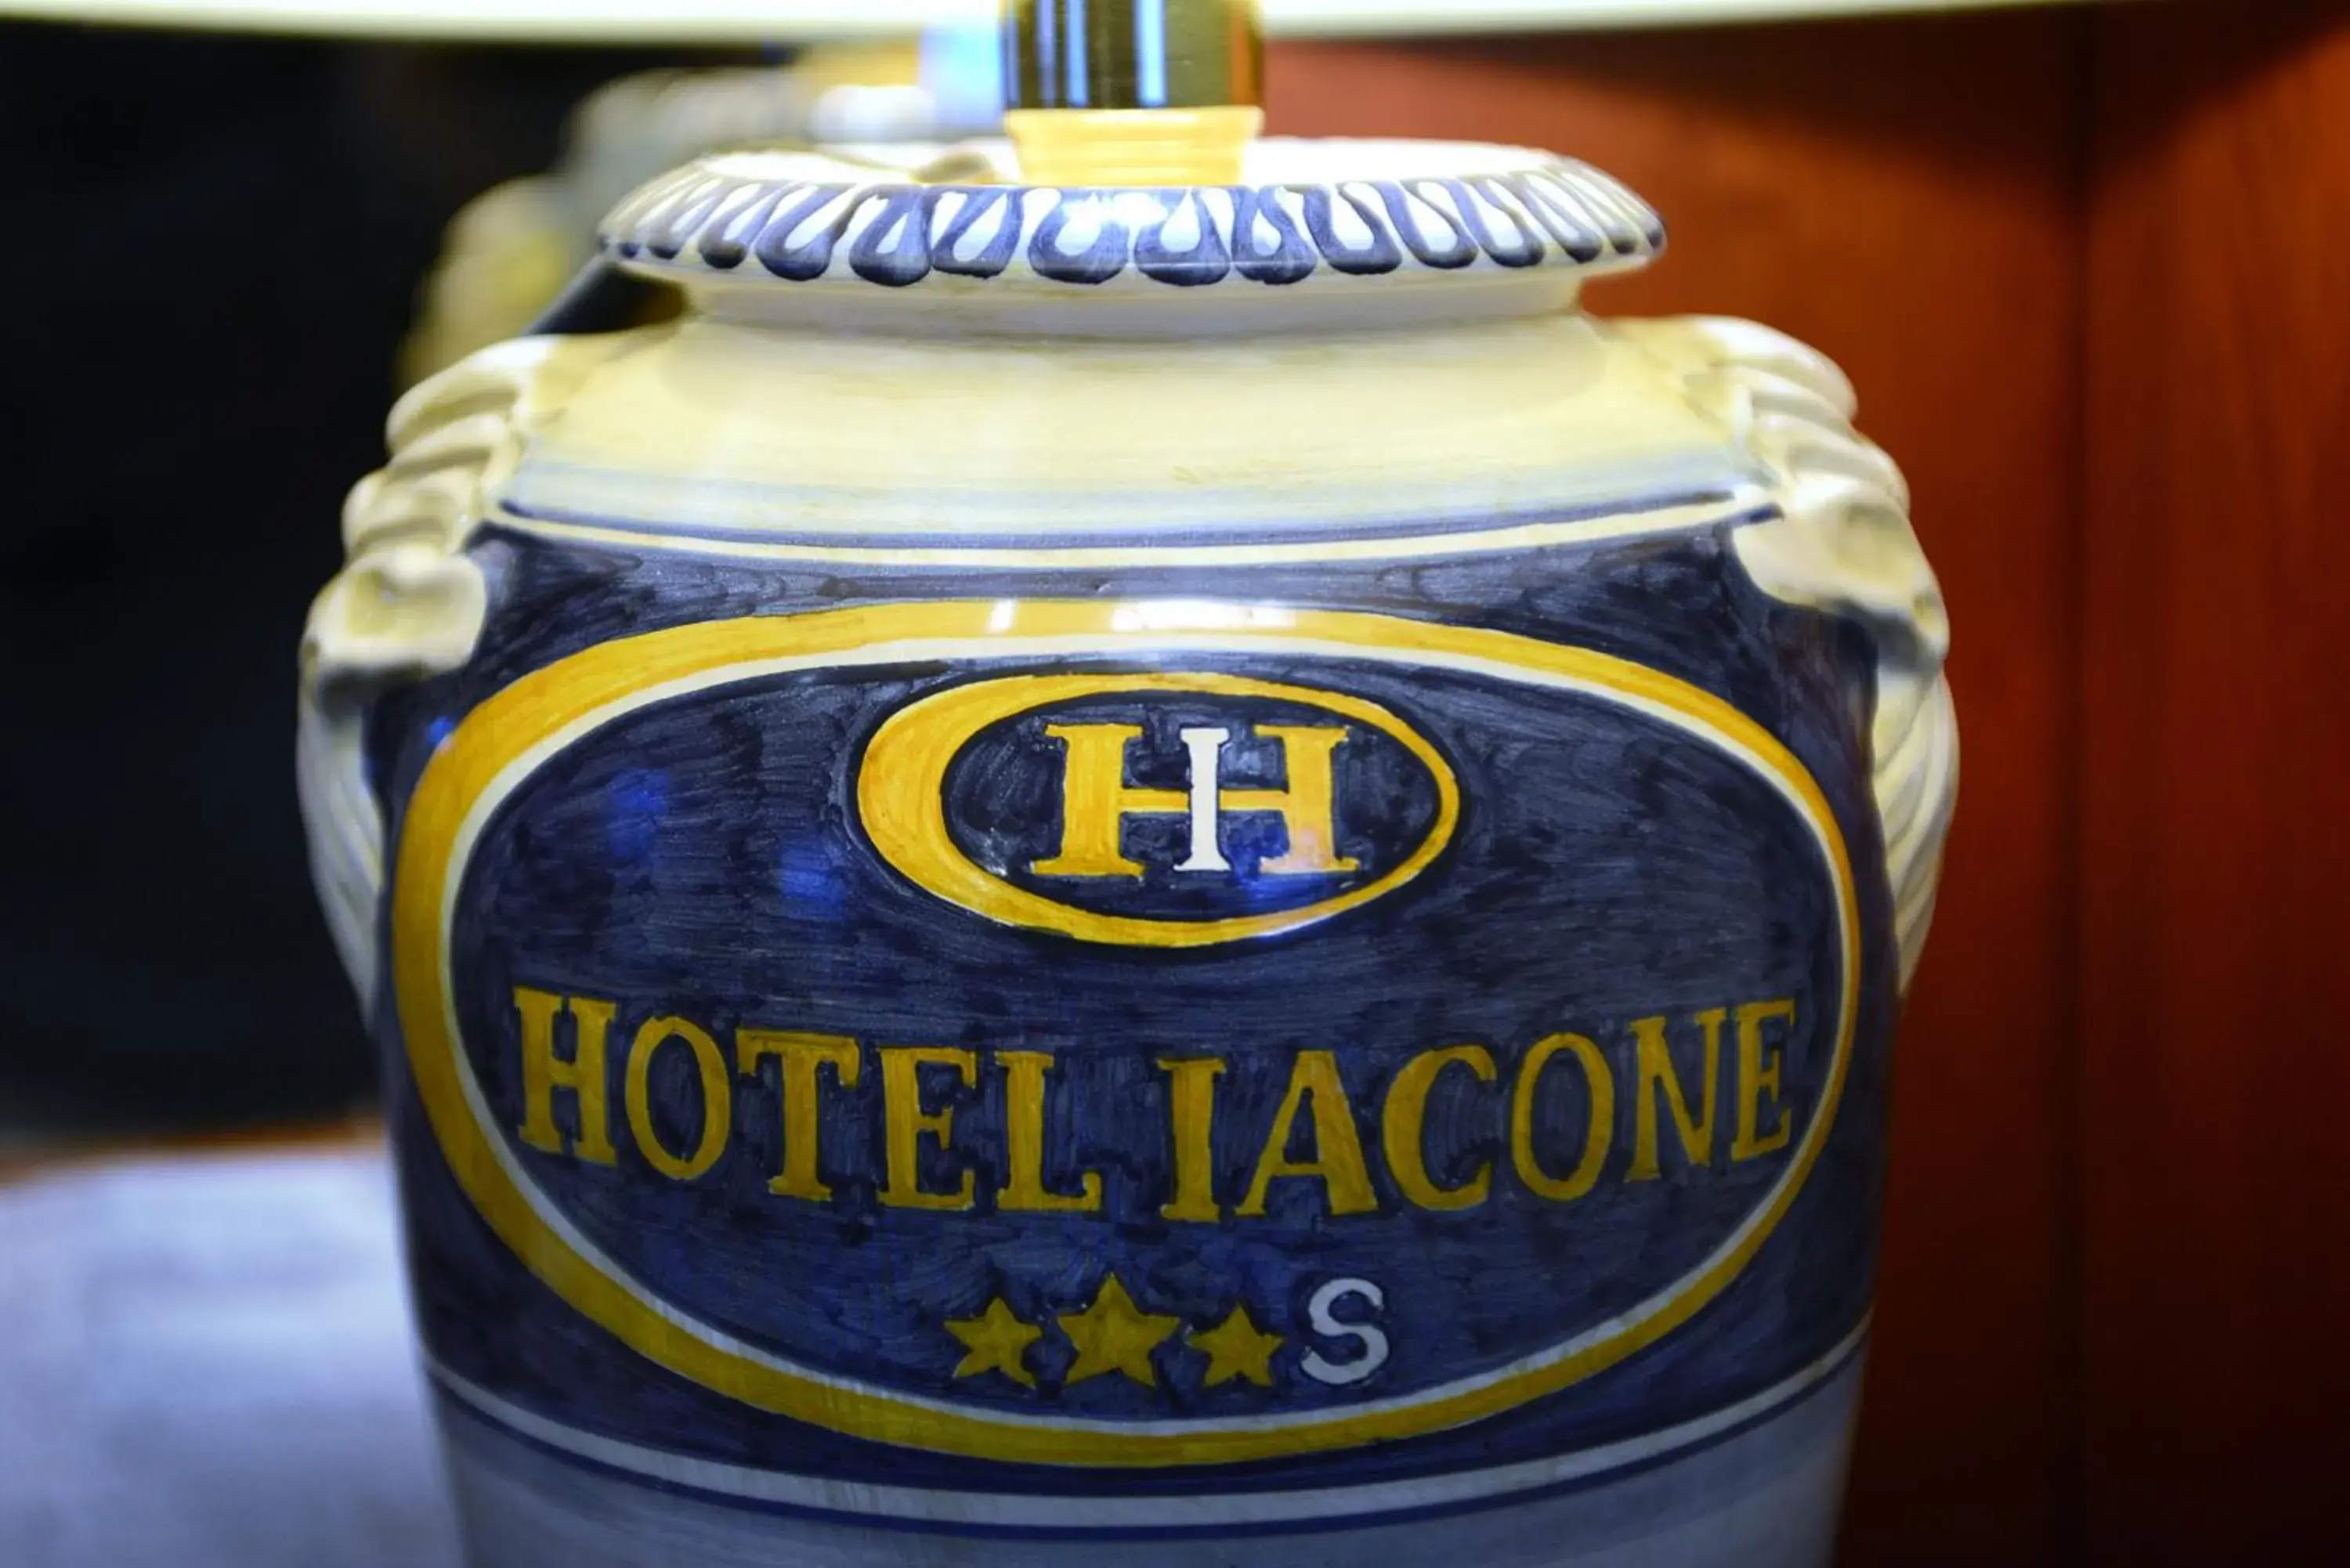 Decorative detail in Hotel Iacone